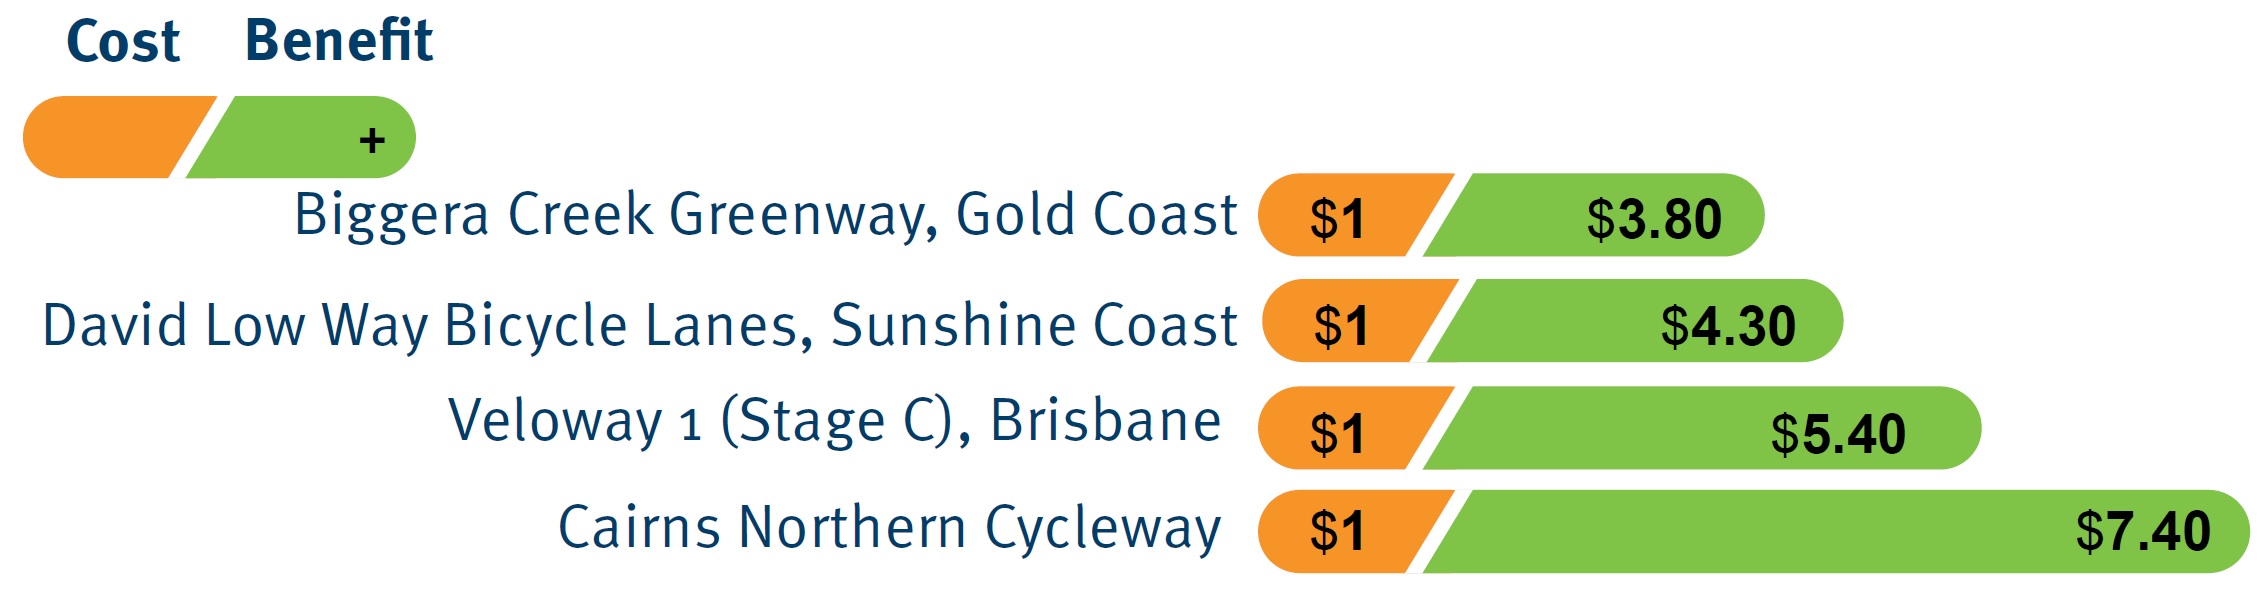 Info graphic showing cost benefit analysis for every $1 invested in cycling across 4 projects—Biggera Creek Greenway ($3.80), David Low Way Bicycle Lanes ($4.30), Veloway 1 (Stage C) ($5.40) and Cairns Northern Cycleway ($7.40)